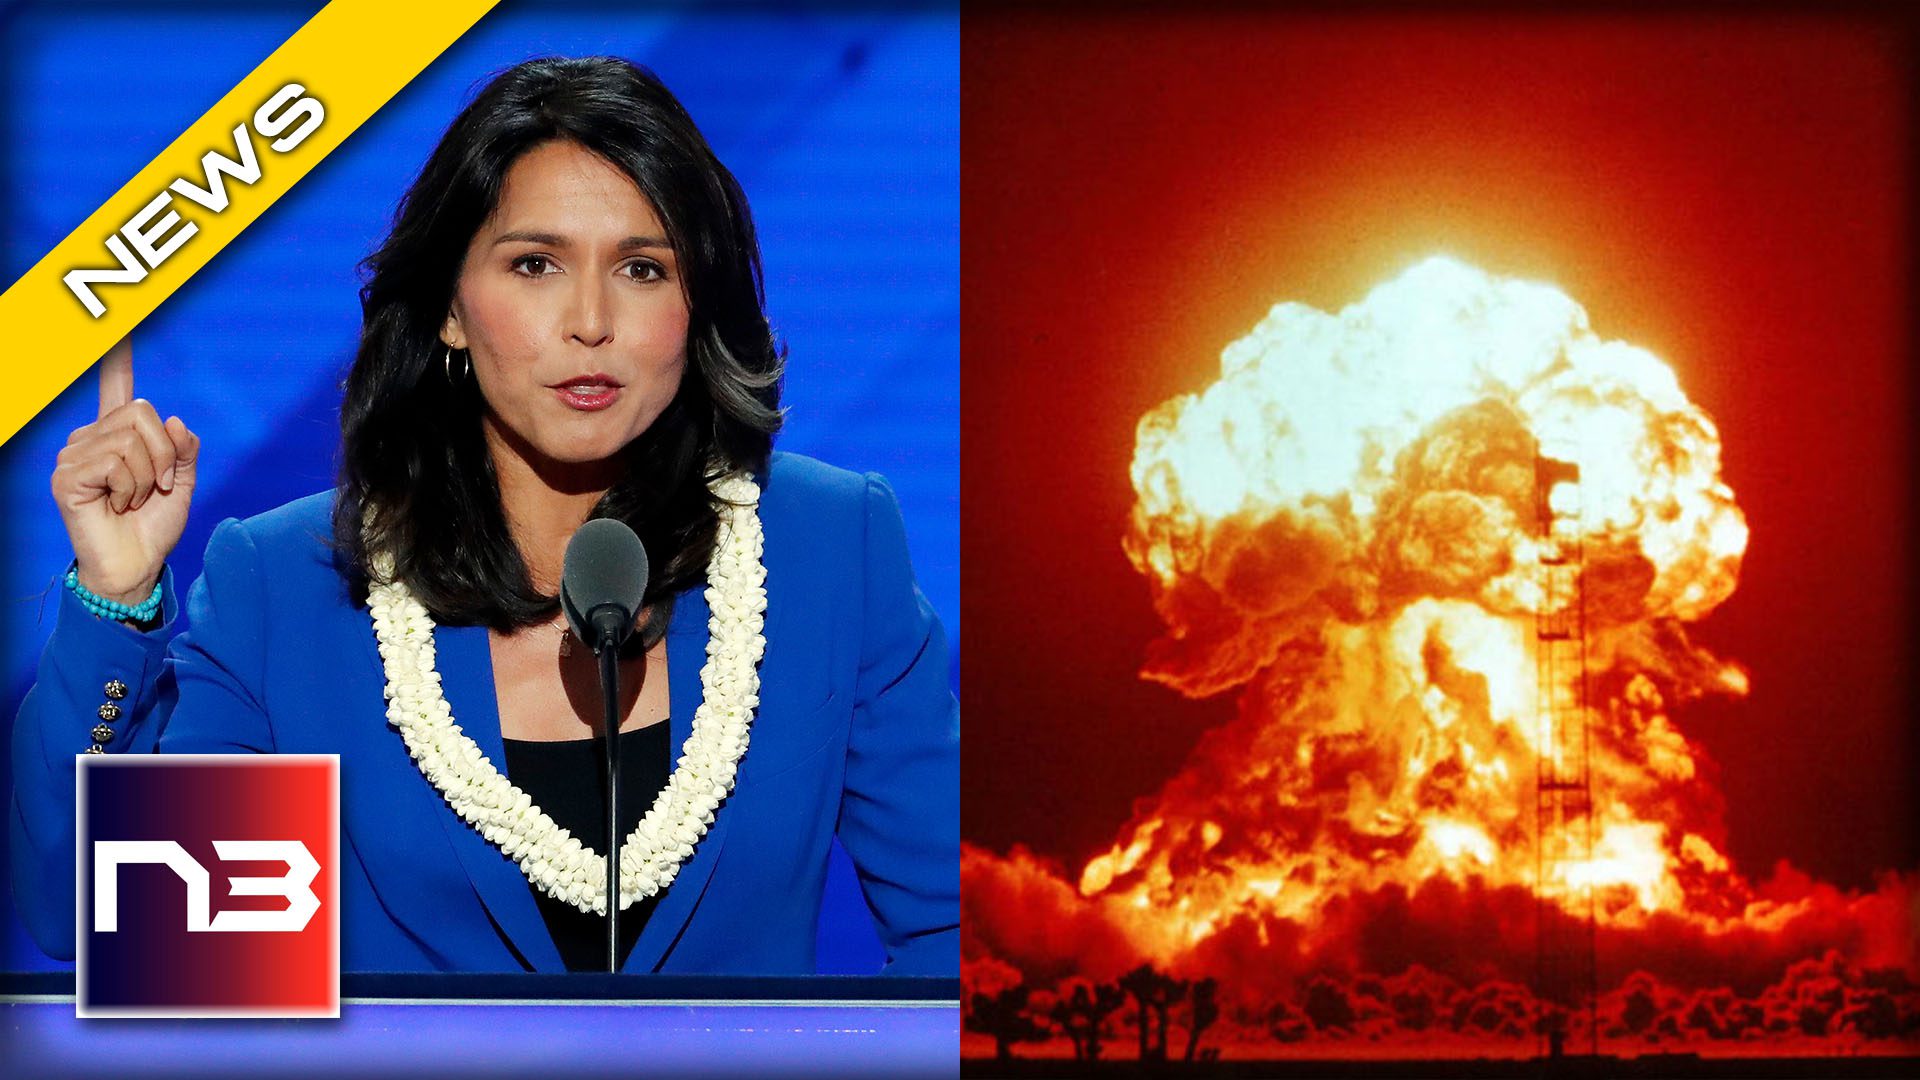 WATCH: Tulsi Gabbard Goes Scorched Earth on Joe Biden and His Administration